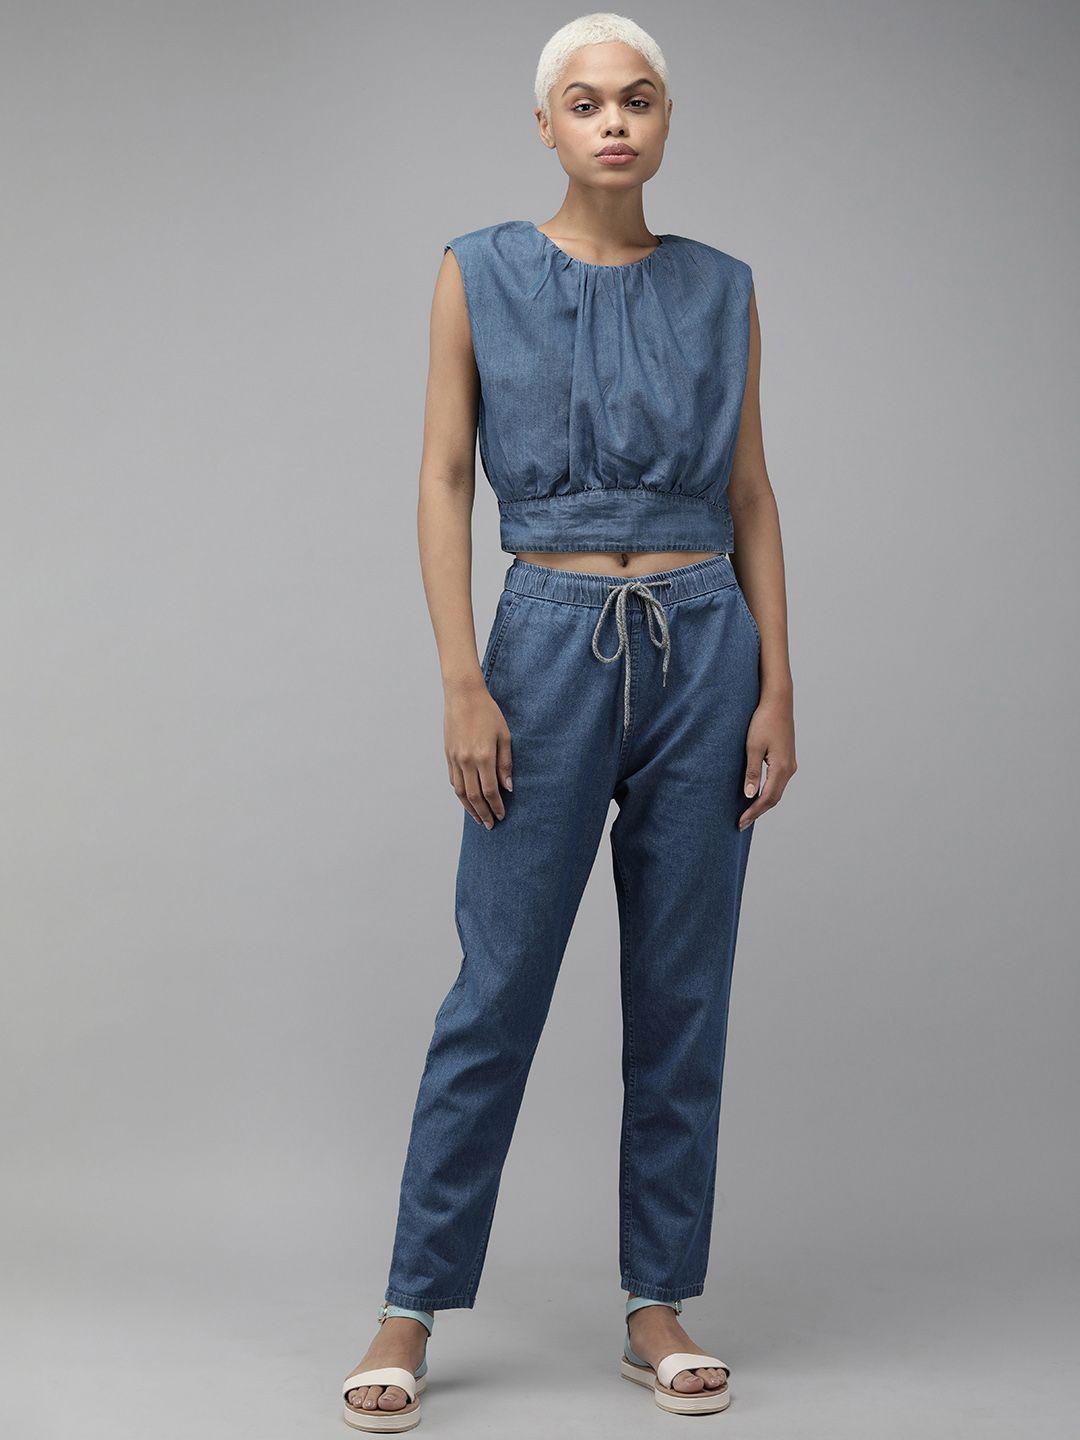 the roadster lifestyle co women blue solid denim co-ord set